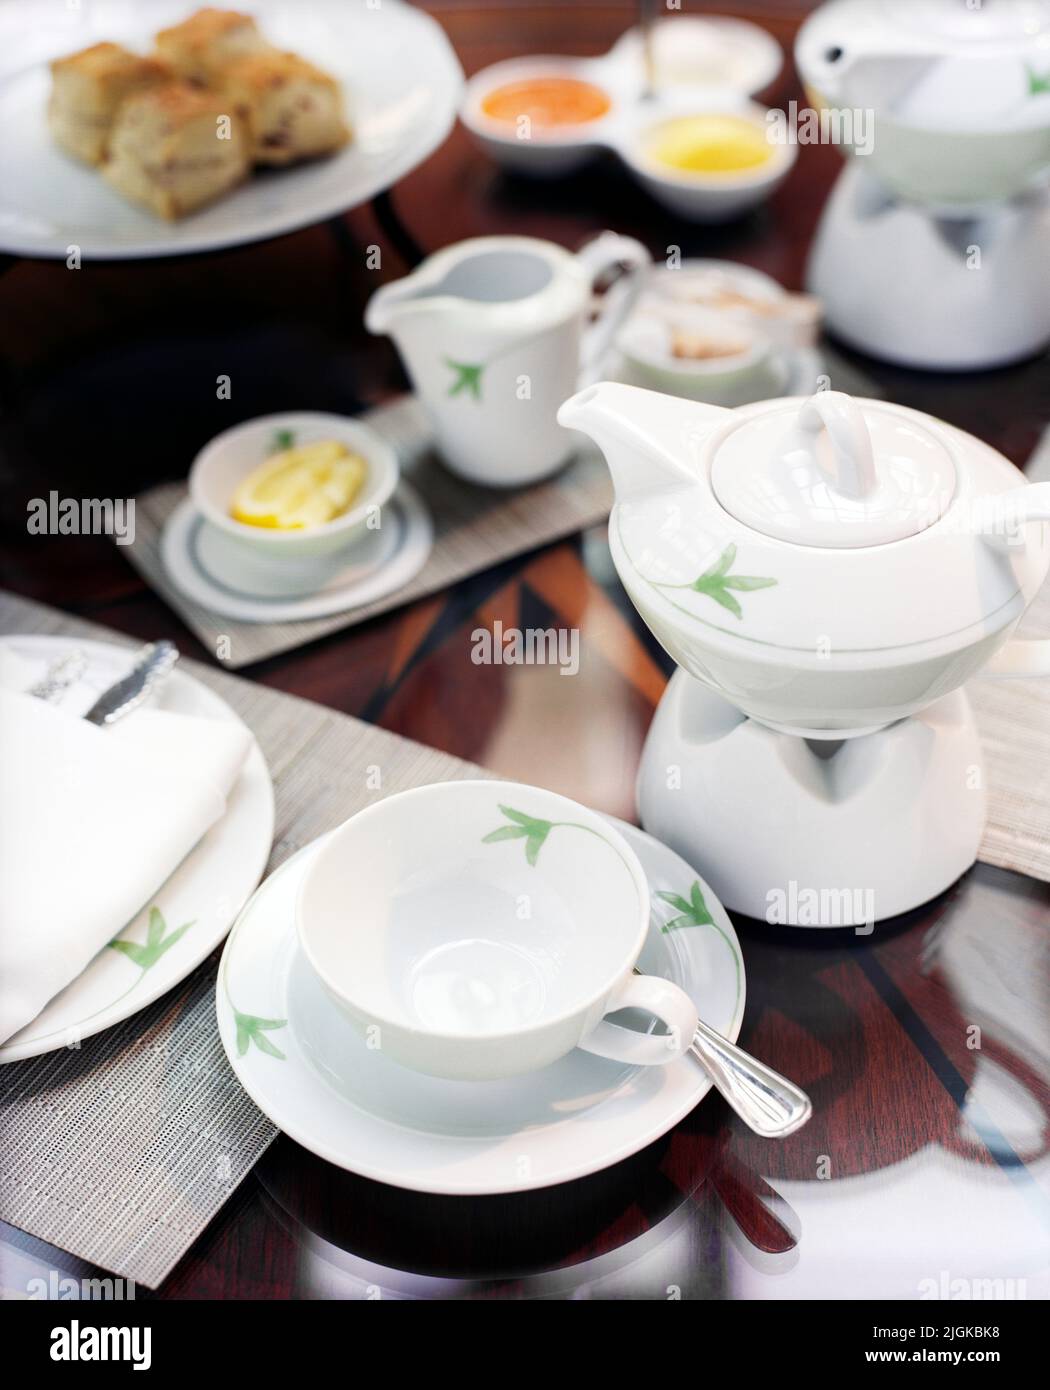 Afternoon tea service at a hotel. Stock Photo